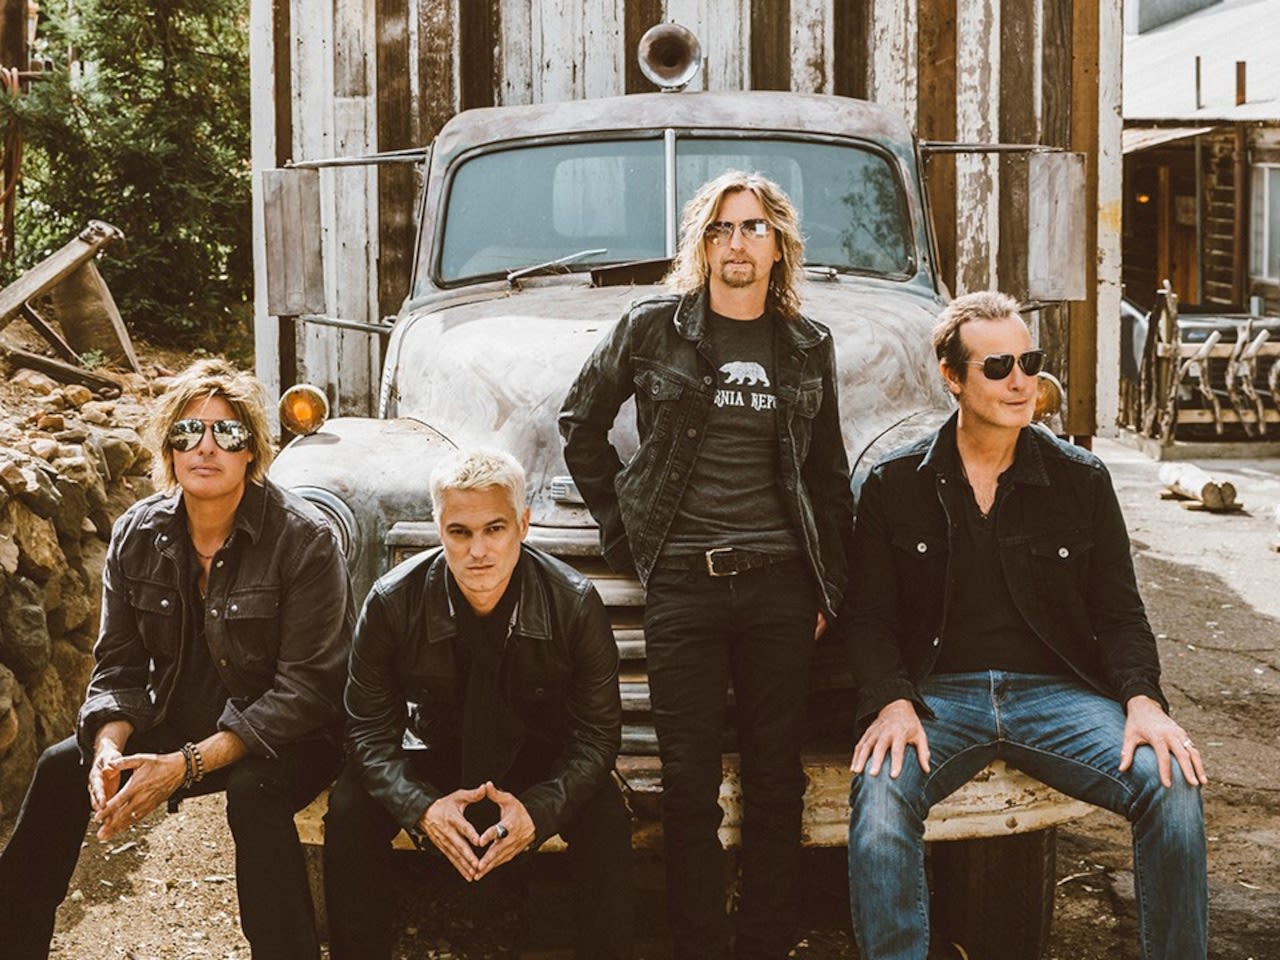 Rock band Stone Temple Pilots to kick off National Cherry Festival in Traverse City